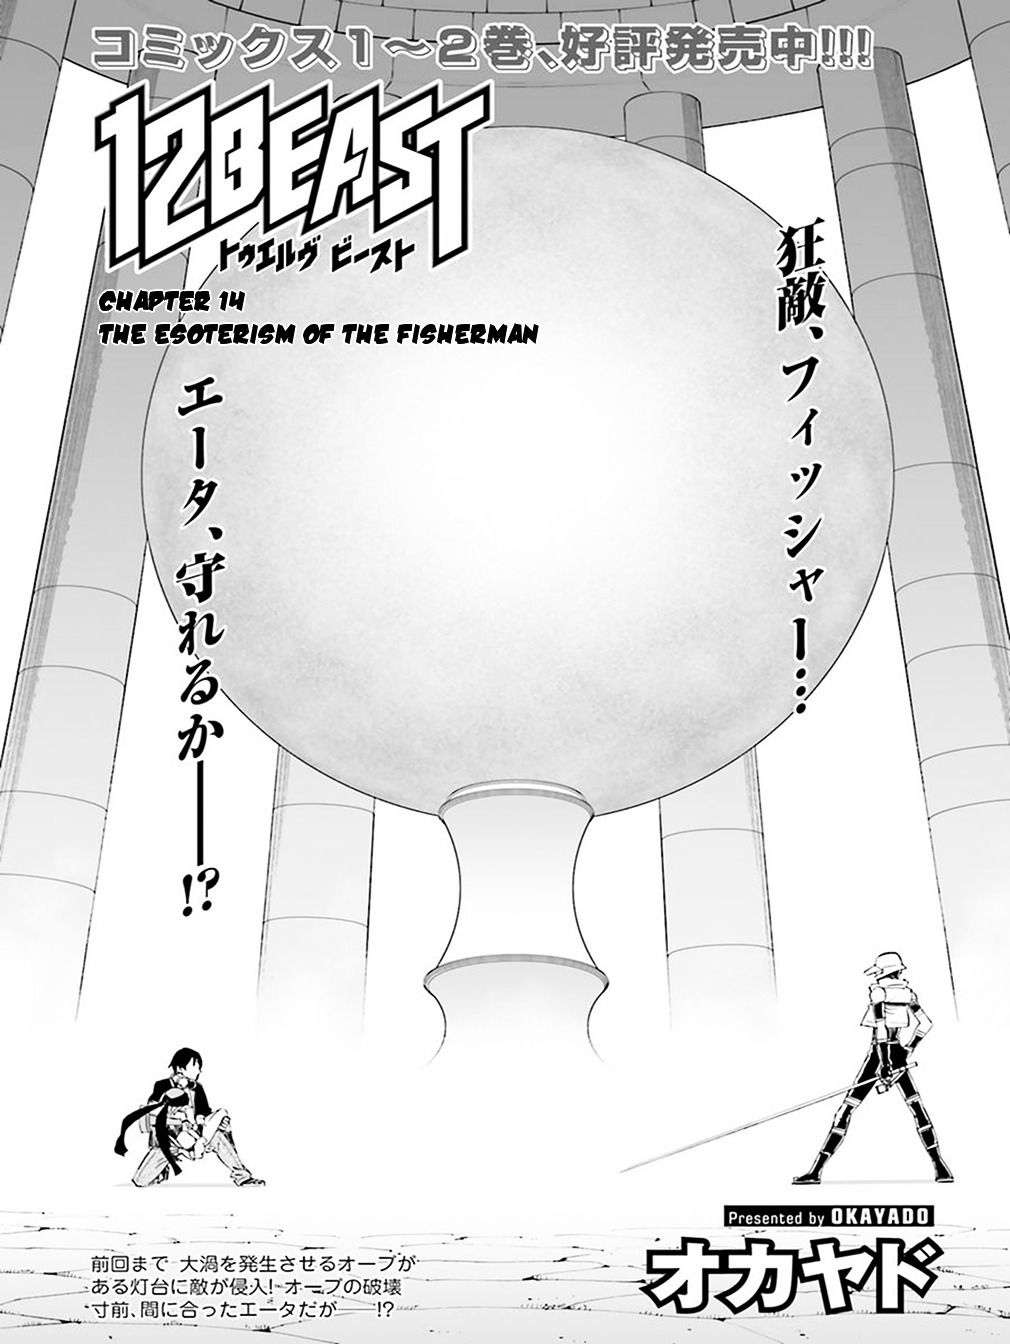 12 Beast Vol.3 Chapter 14 : The Esoterism Of The Fisherman - Picture 1